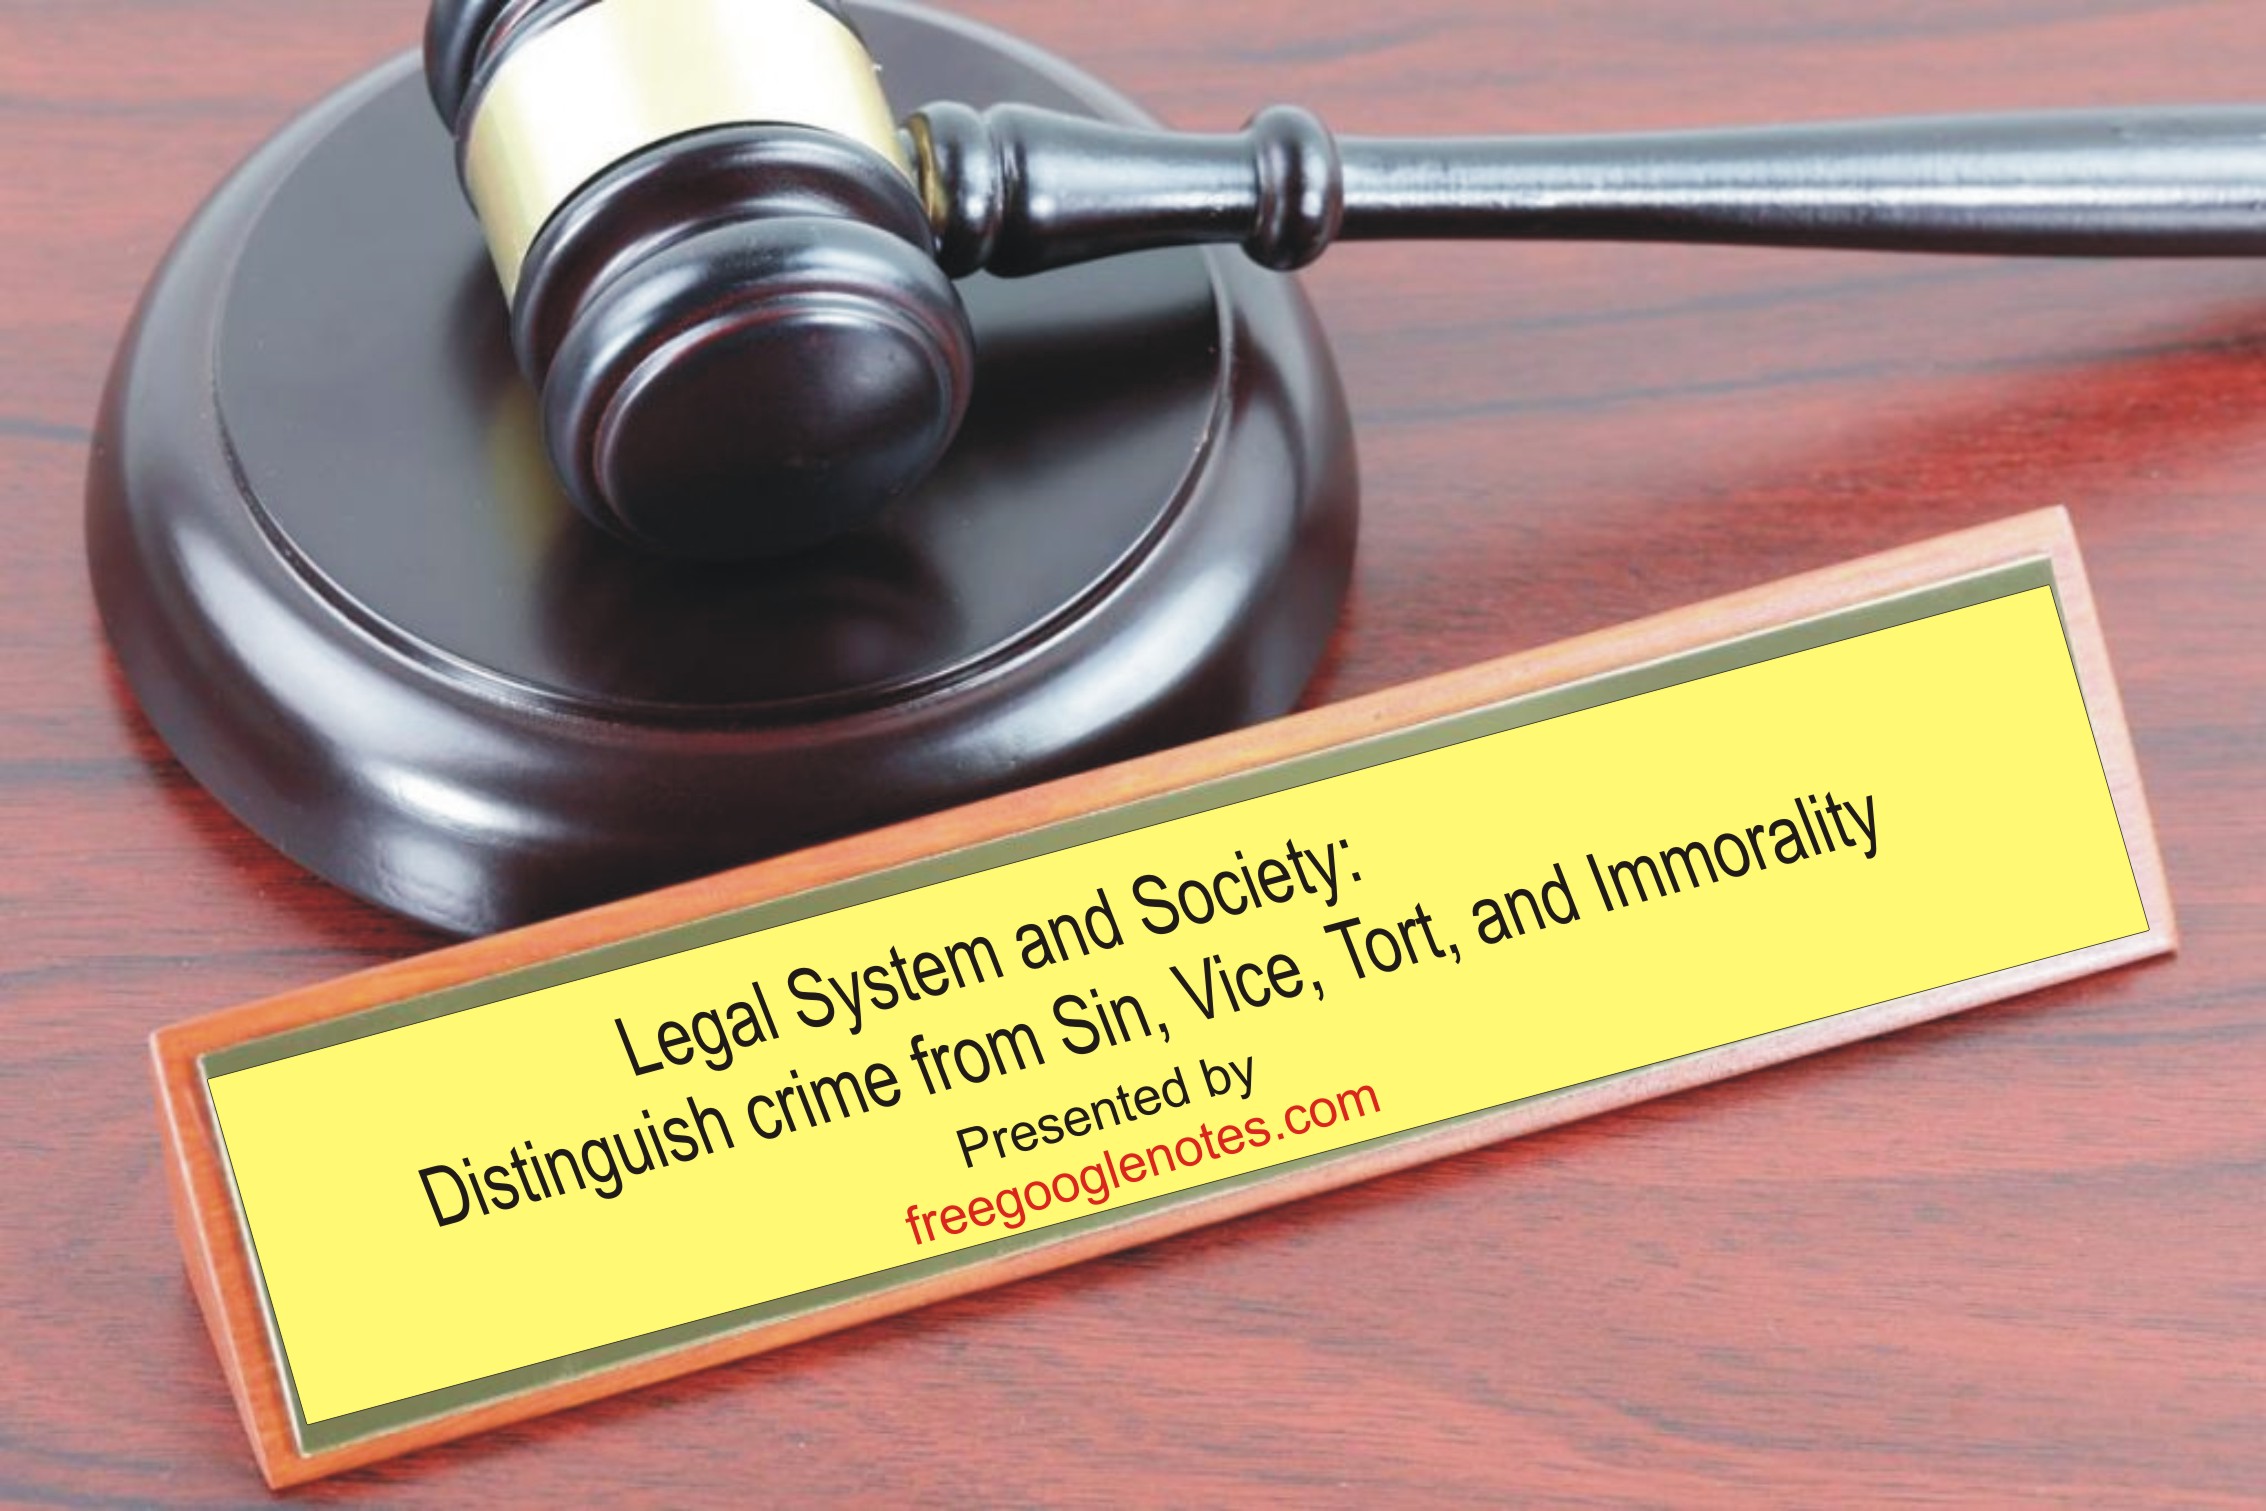 Legal System and Society: Distinguish crime from Sin, Vice, Tort, and Immorality